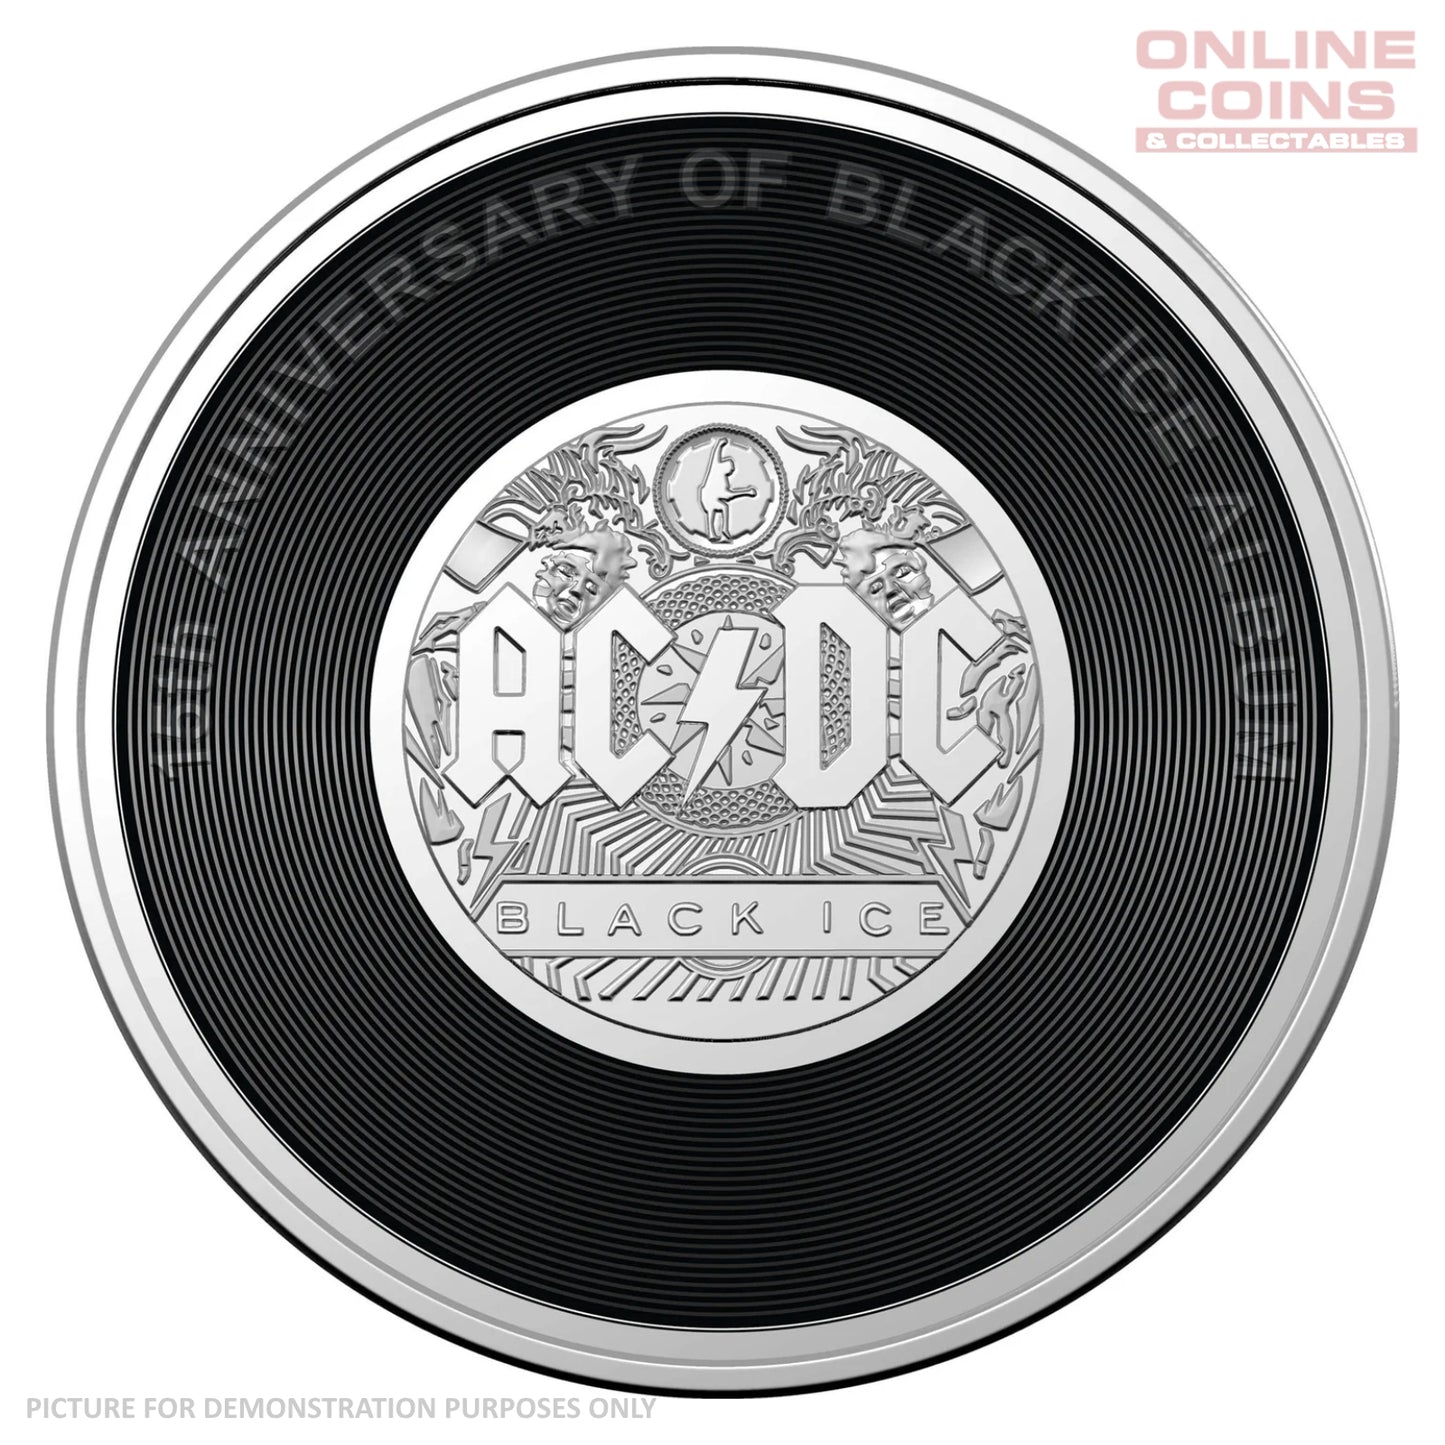 2023 RAM 20c Coloured Uncirculated Coin - AC/DC 45th Anniversary - BLACK ICE